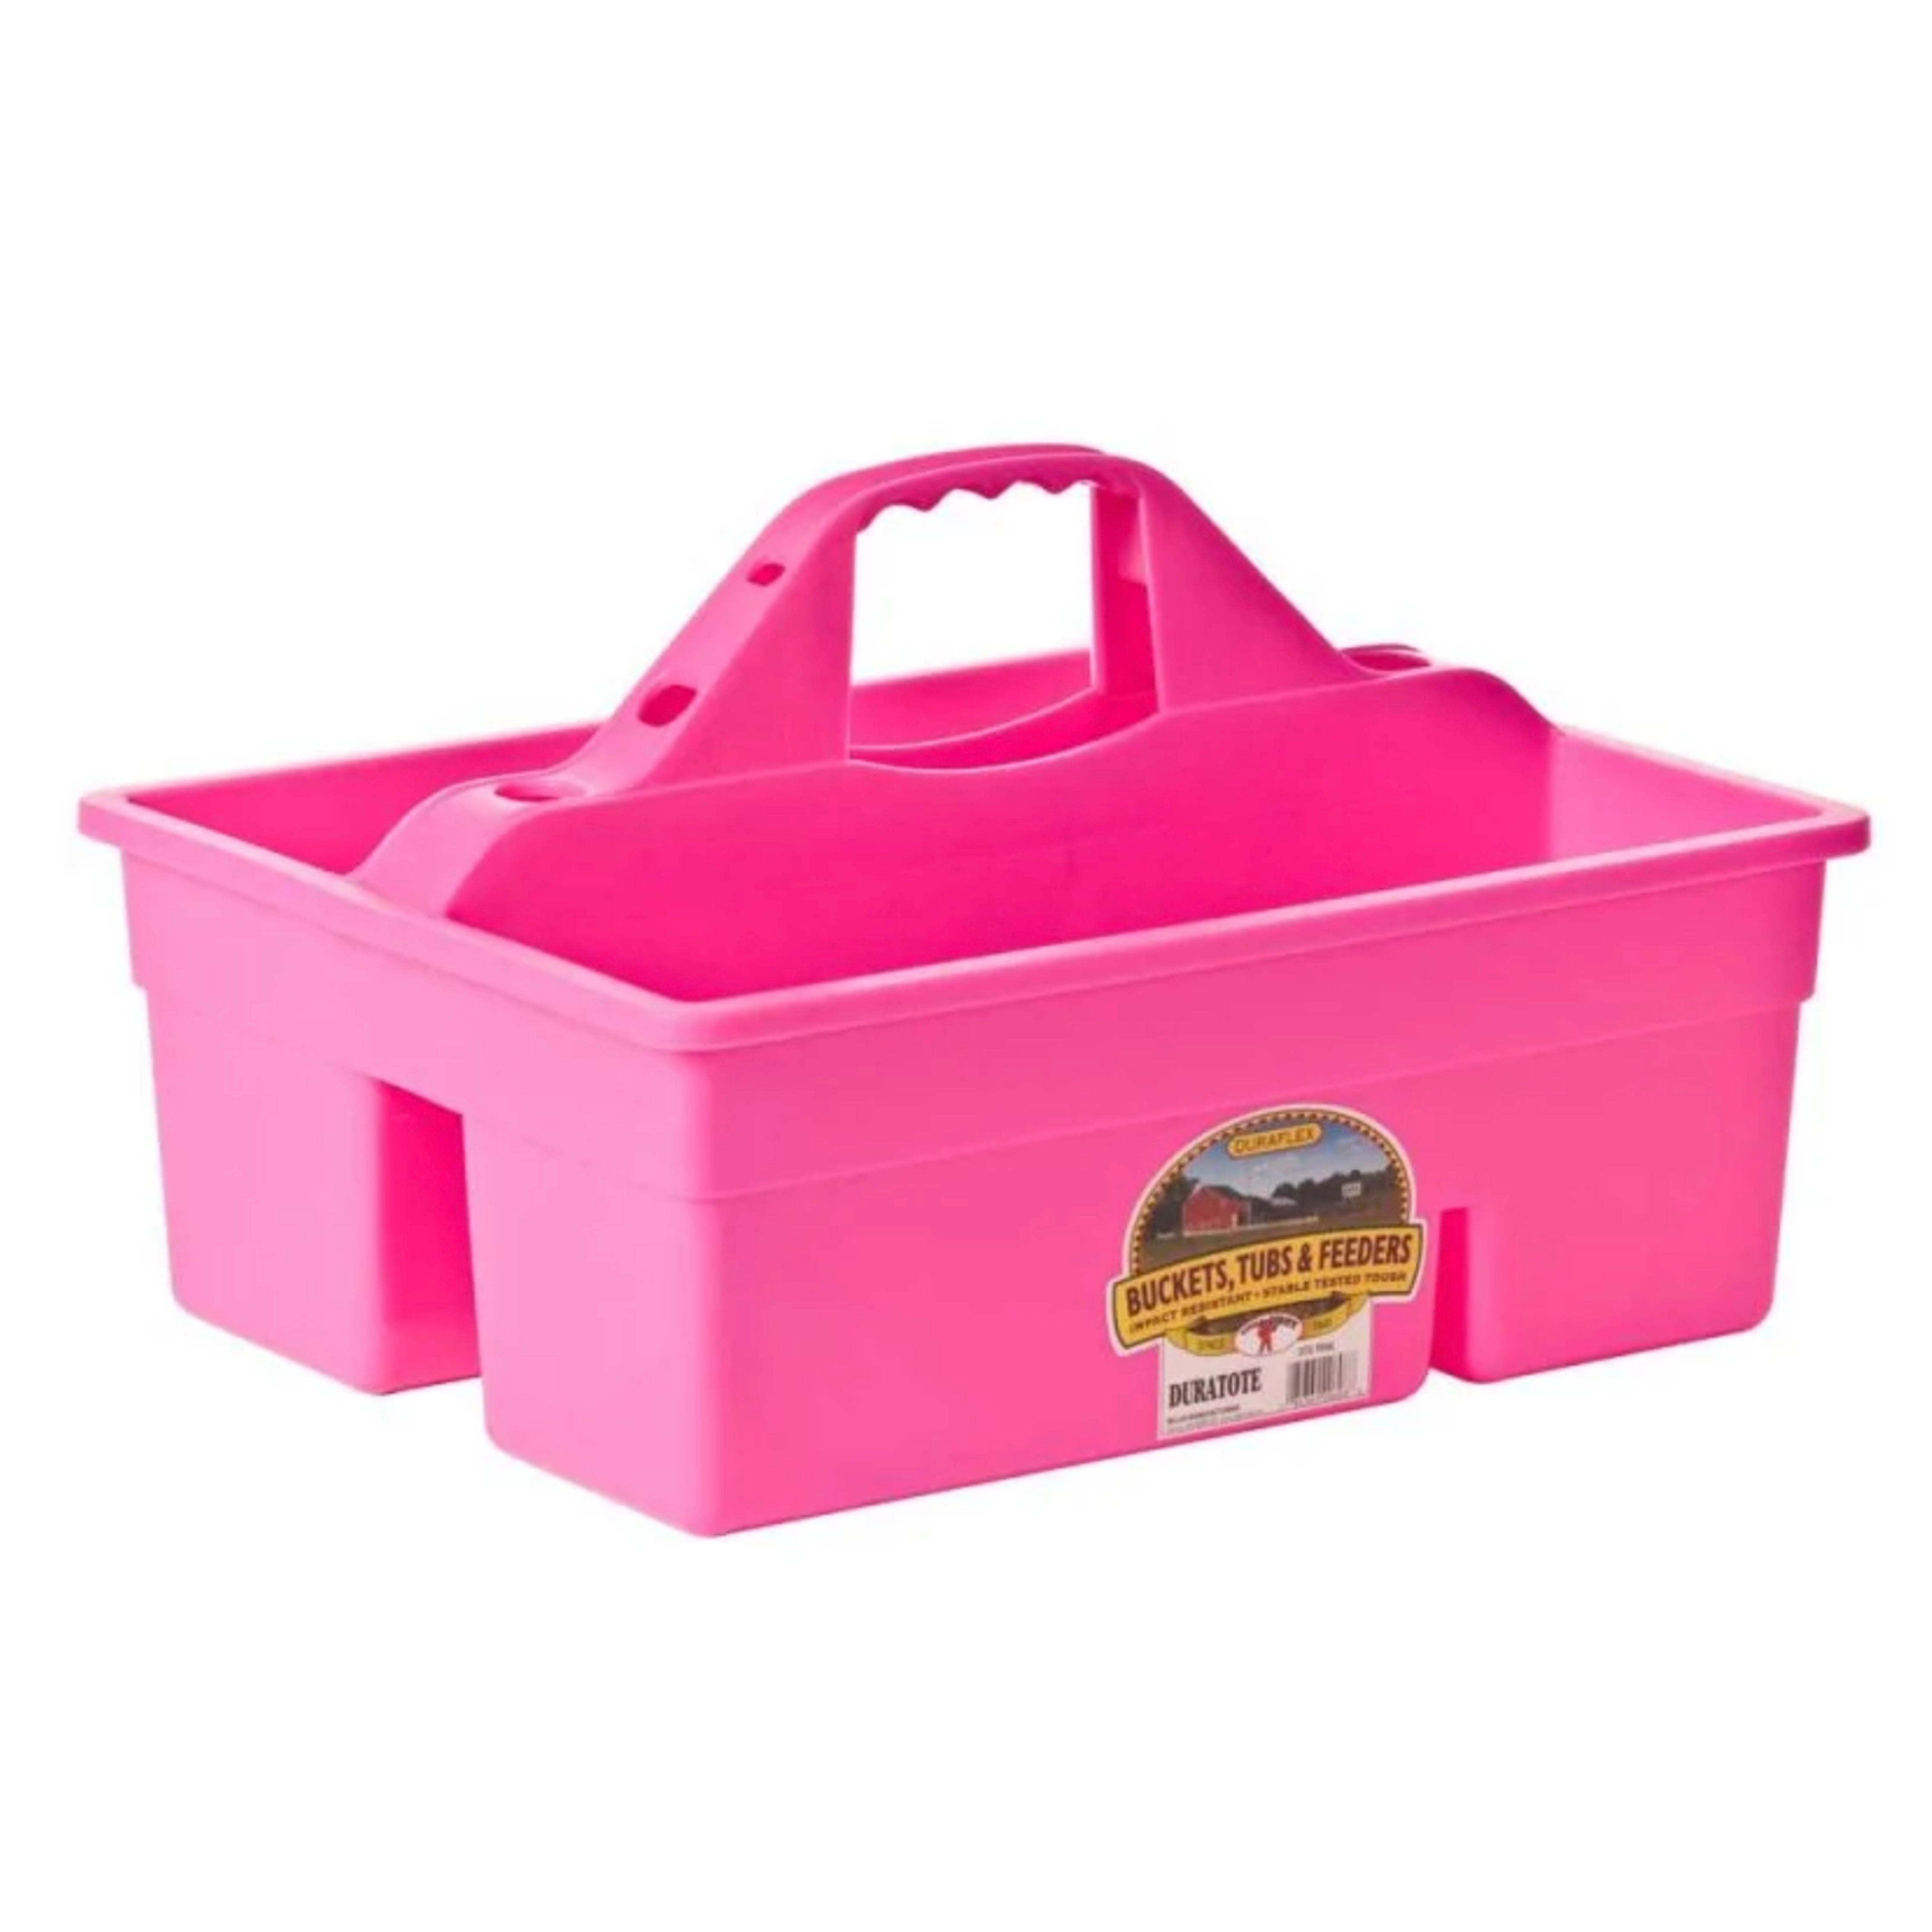 DuraTote Groom Caddy